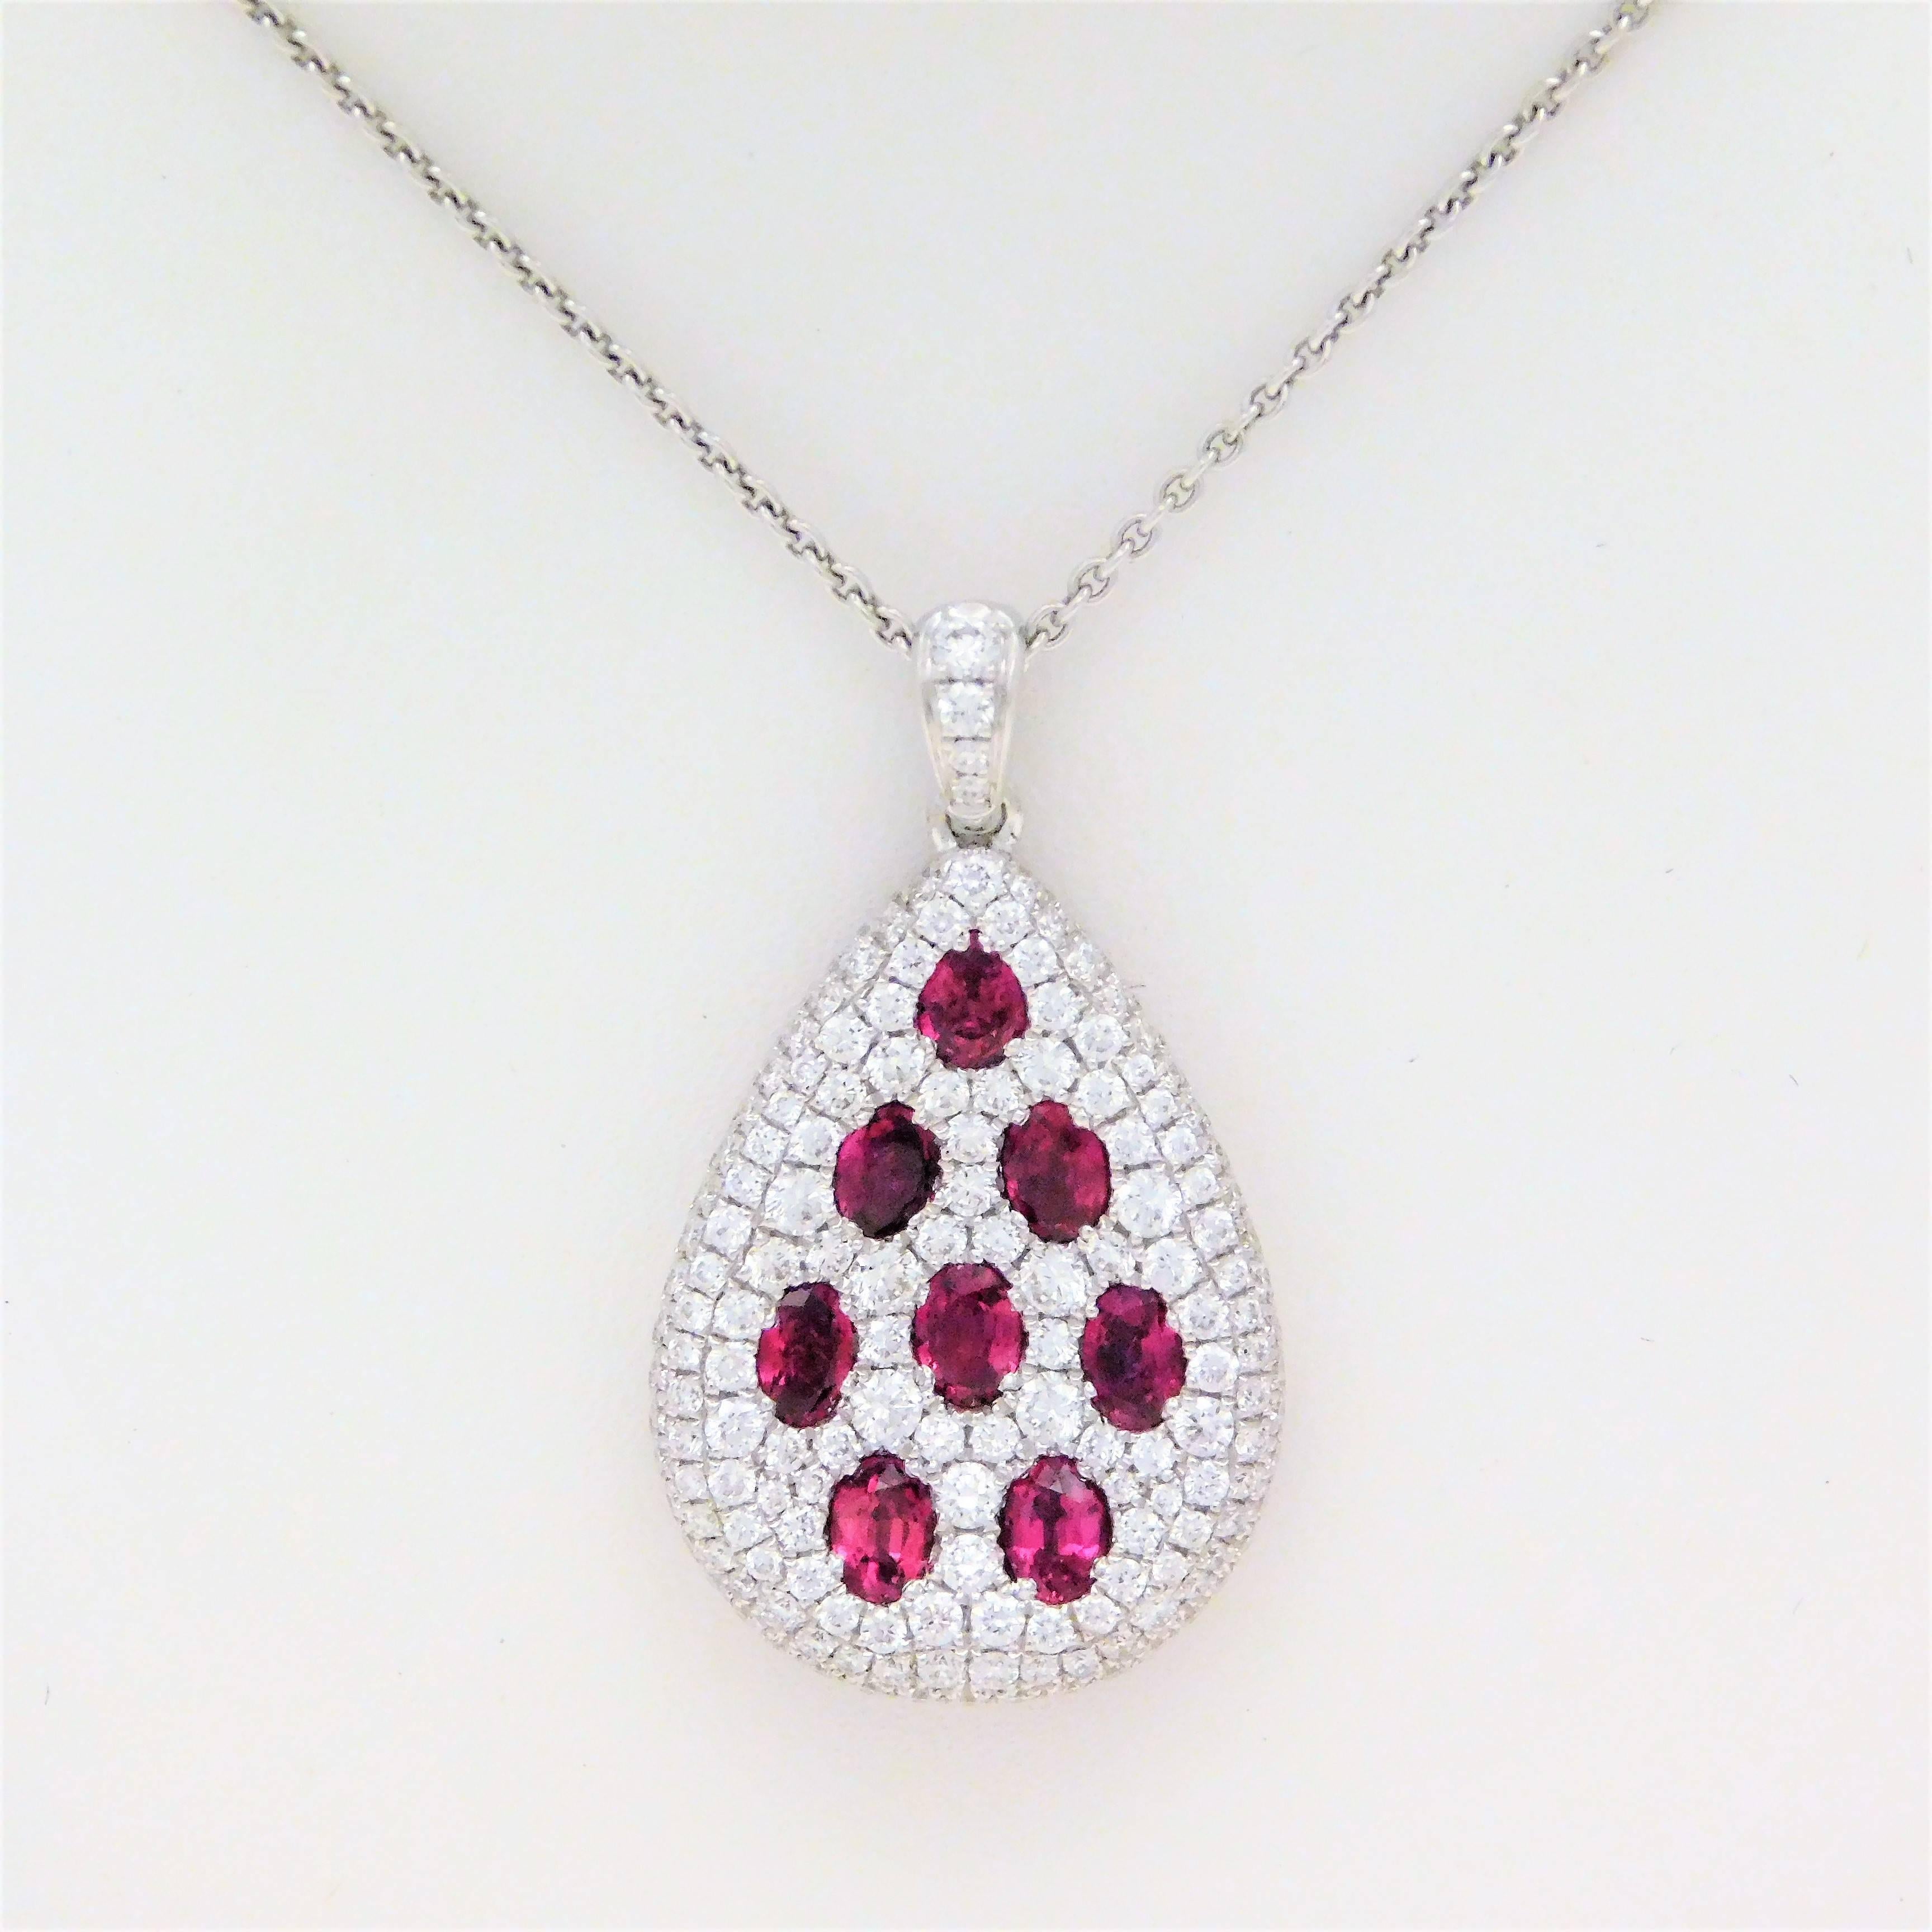 Circa 2018.  Handcrafted in solid 18k white gold, this set of two earrings and one pendant necklace has been designed to match perfectly.  Each earring, as well as the pendant, has been masterfully jeweled with 8 oval faceted rubies approximating